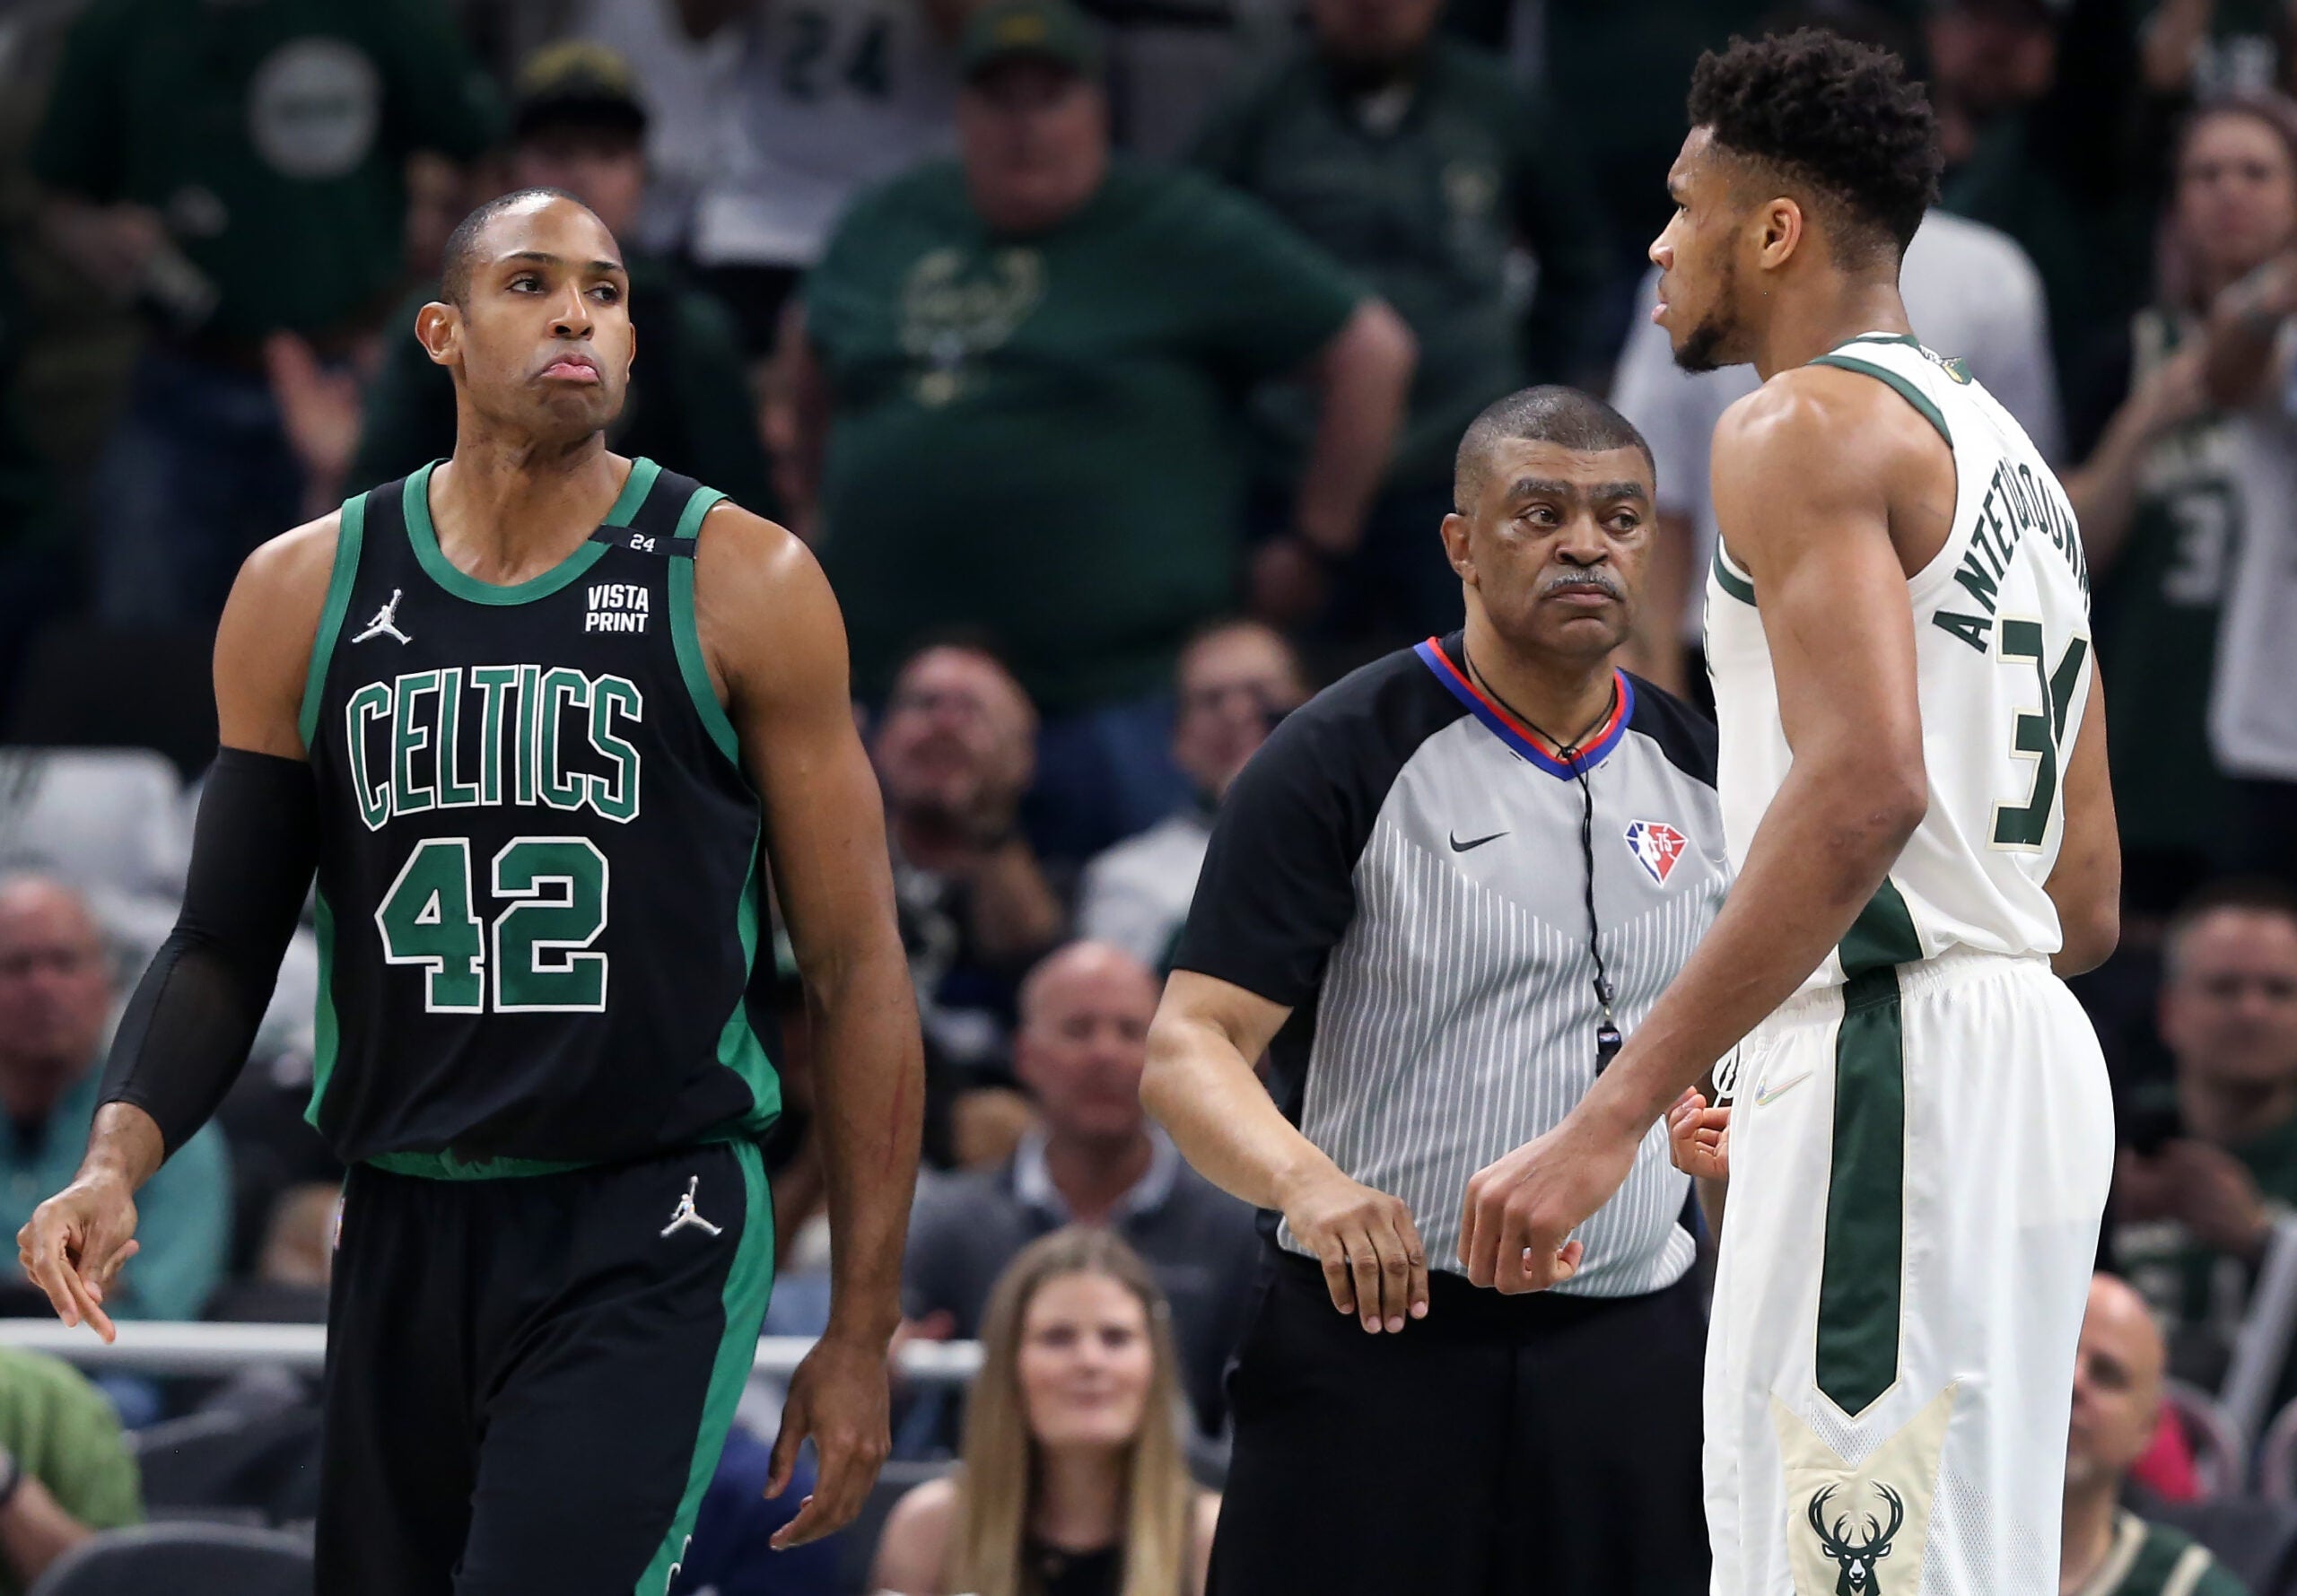 Al Horford giving Giannis Antetokounmpo a stare down for one of the best Celtics moments.